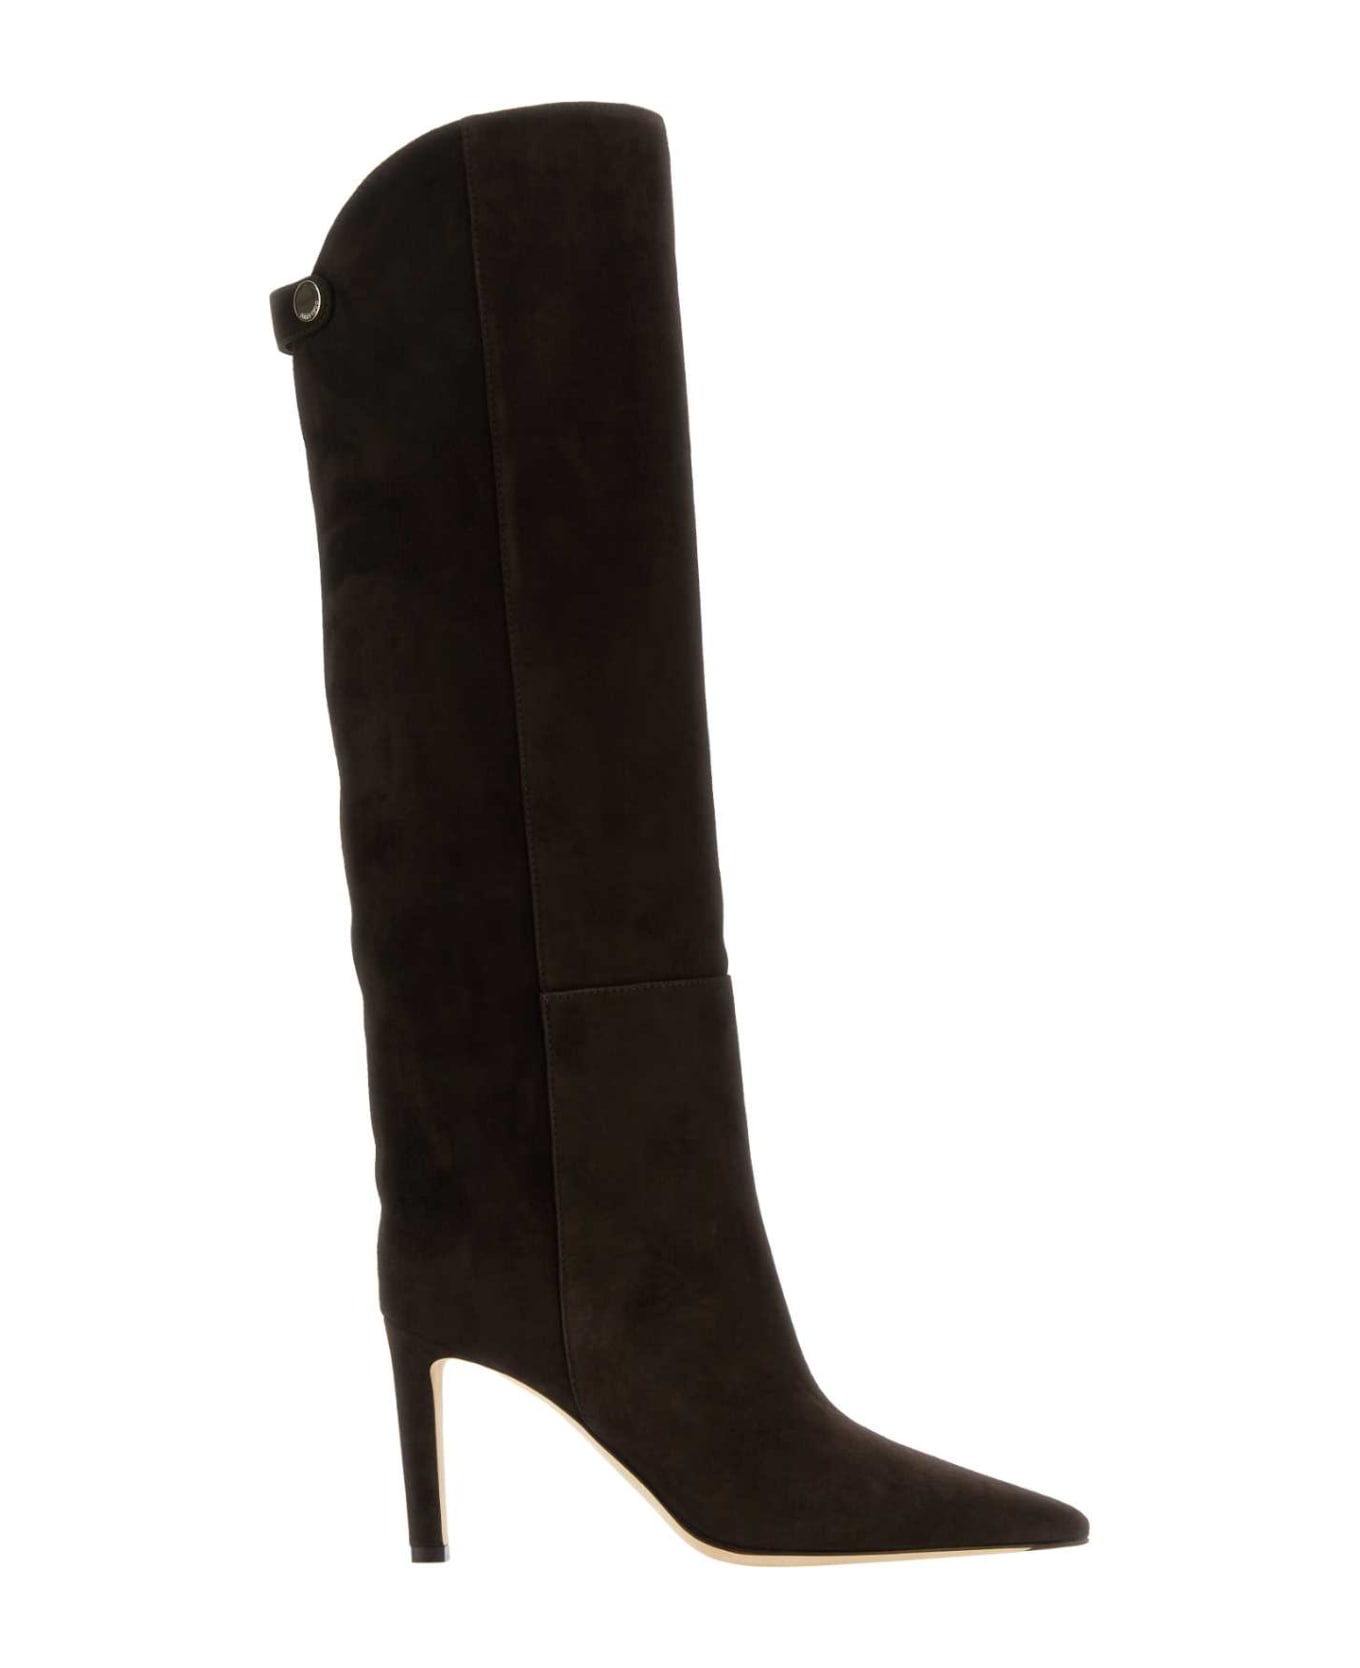 Jimmy Choo Chocolate Suede Alizze Boots - COFFEE ブーツ